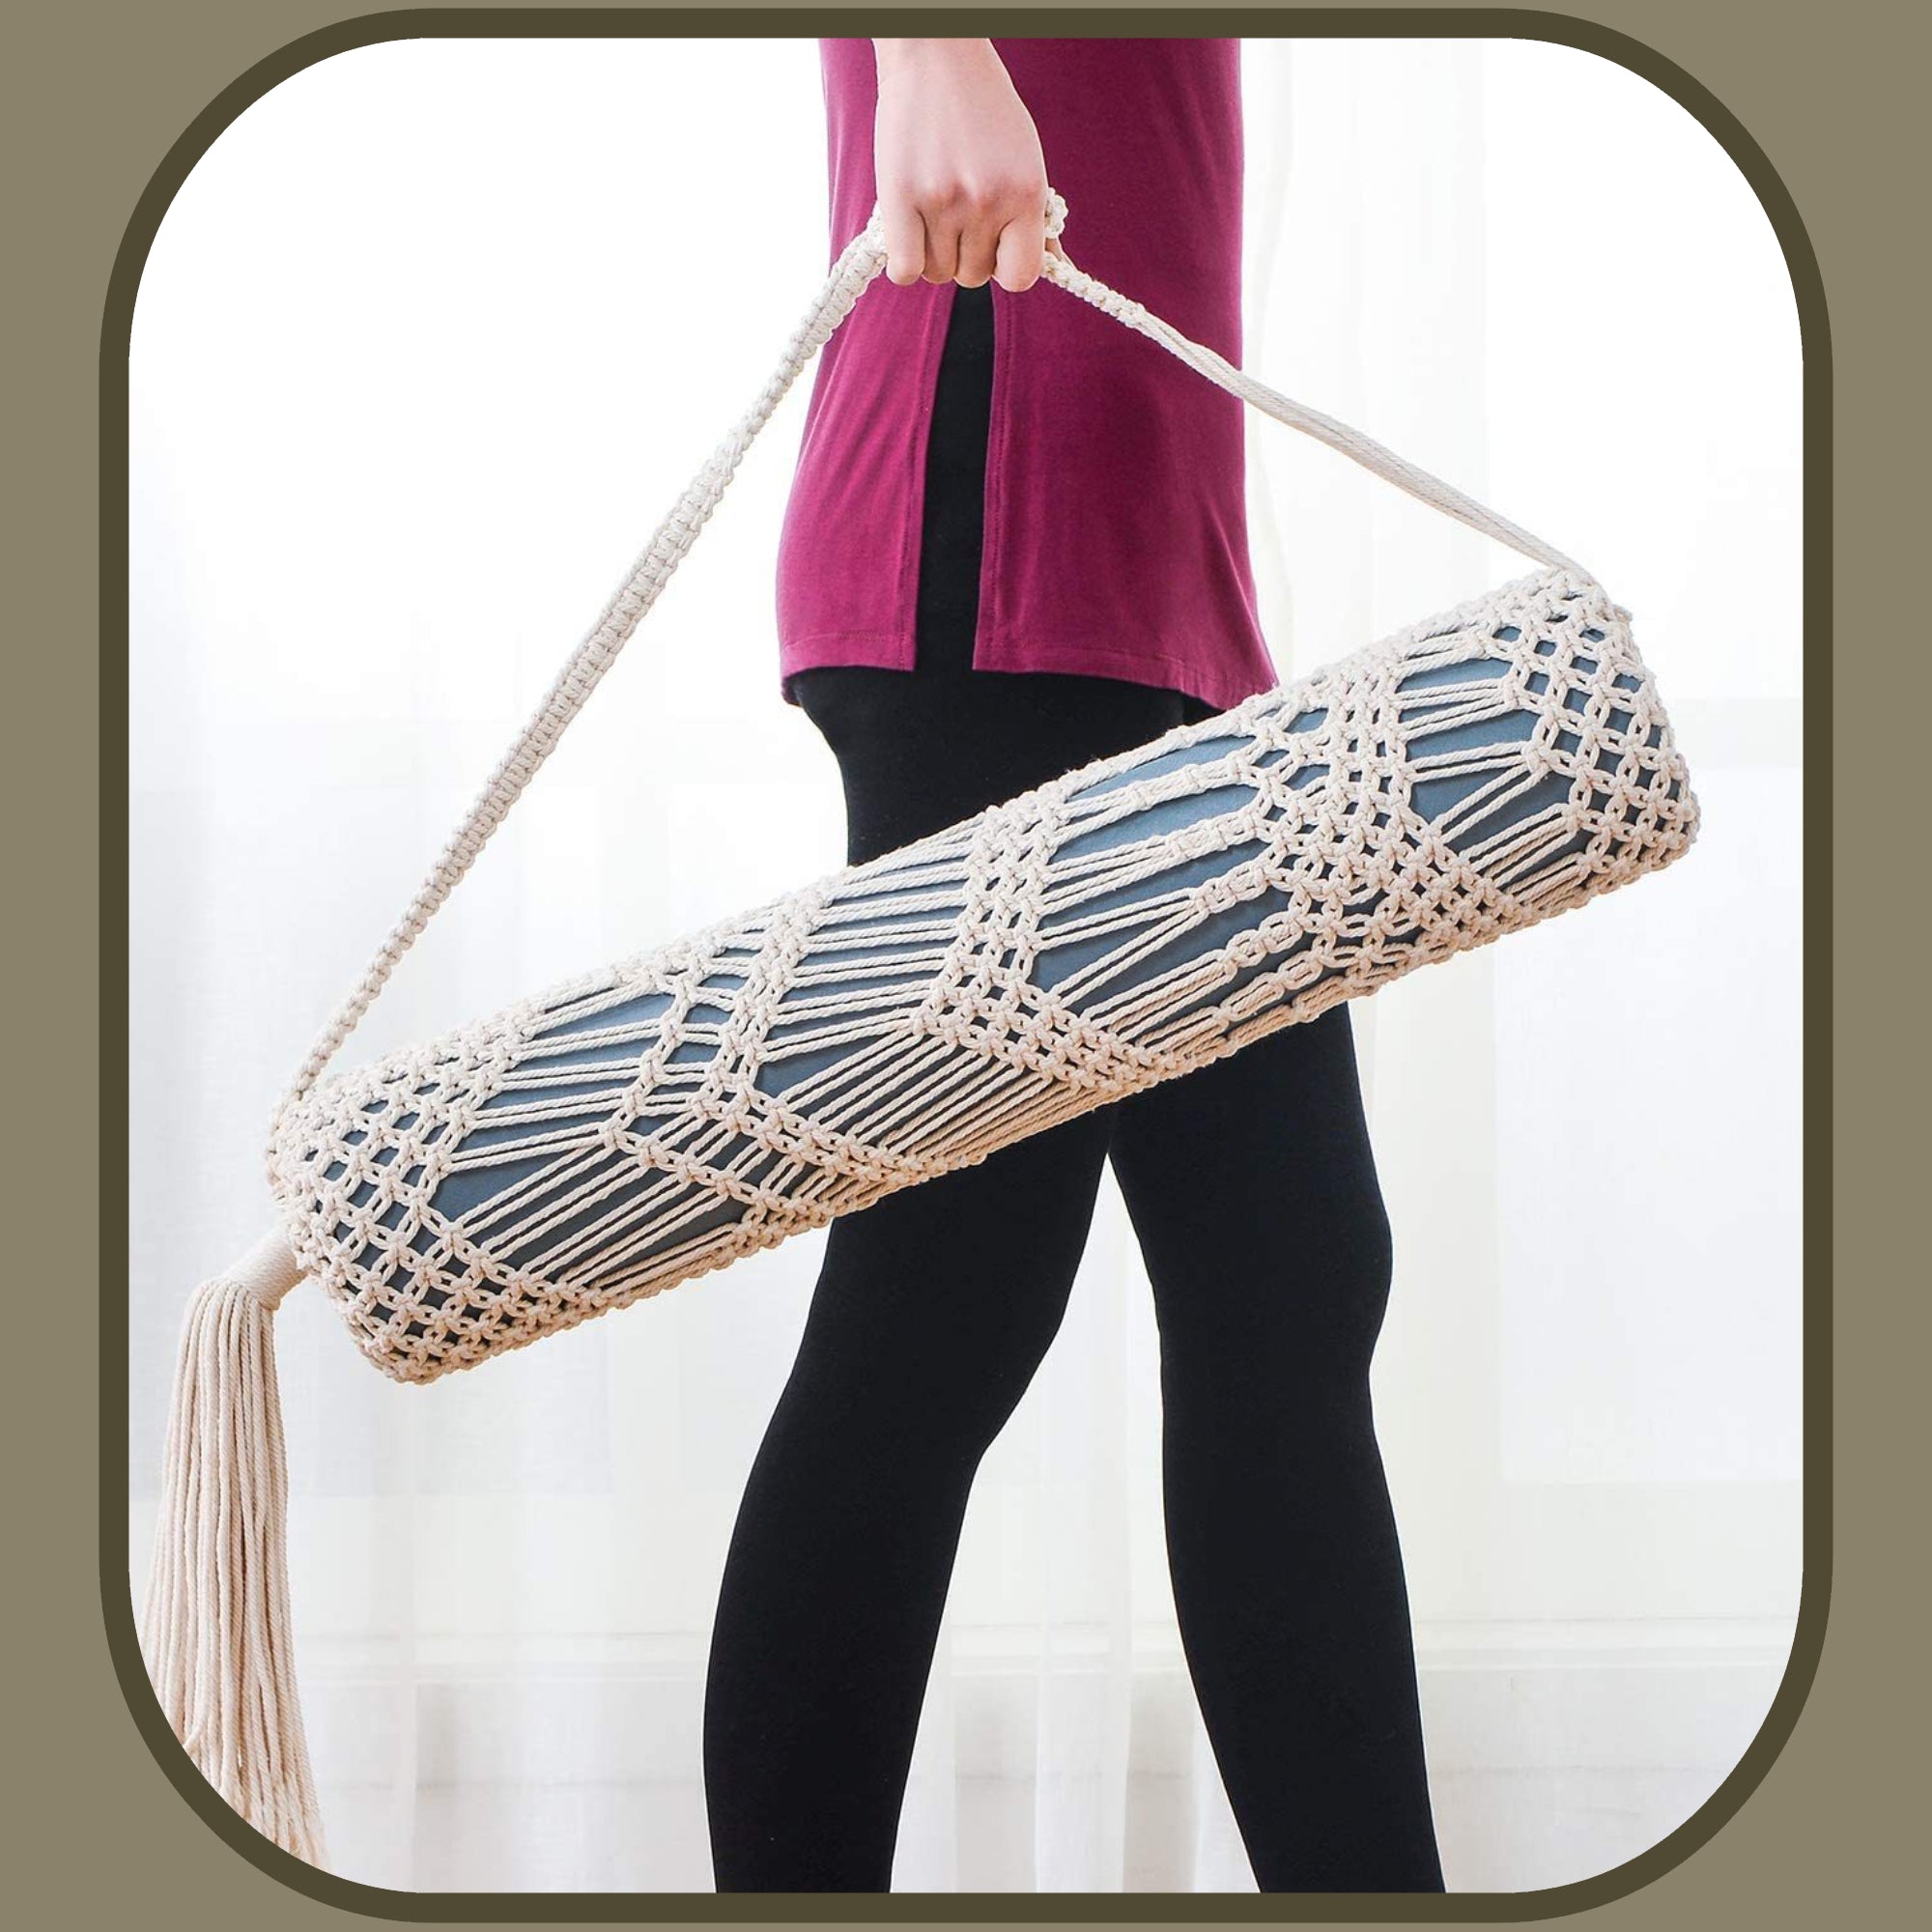 Crochet Macrame Yoga Mat Bag - Large Size Pocket Fit Most Size Mats - Personal Hour for Yoga and Meditations 